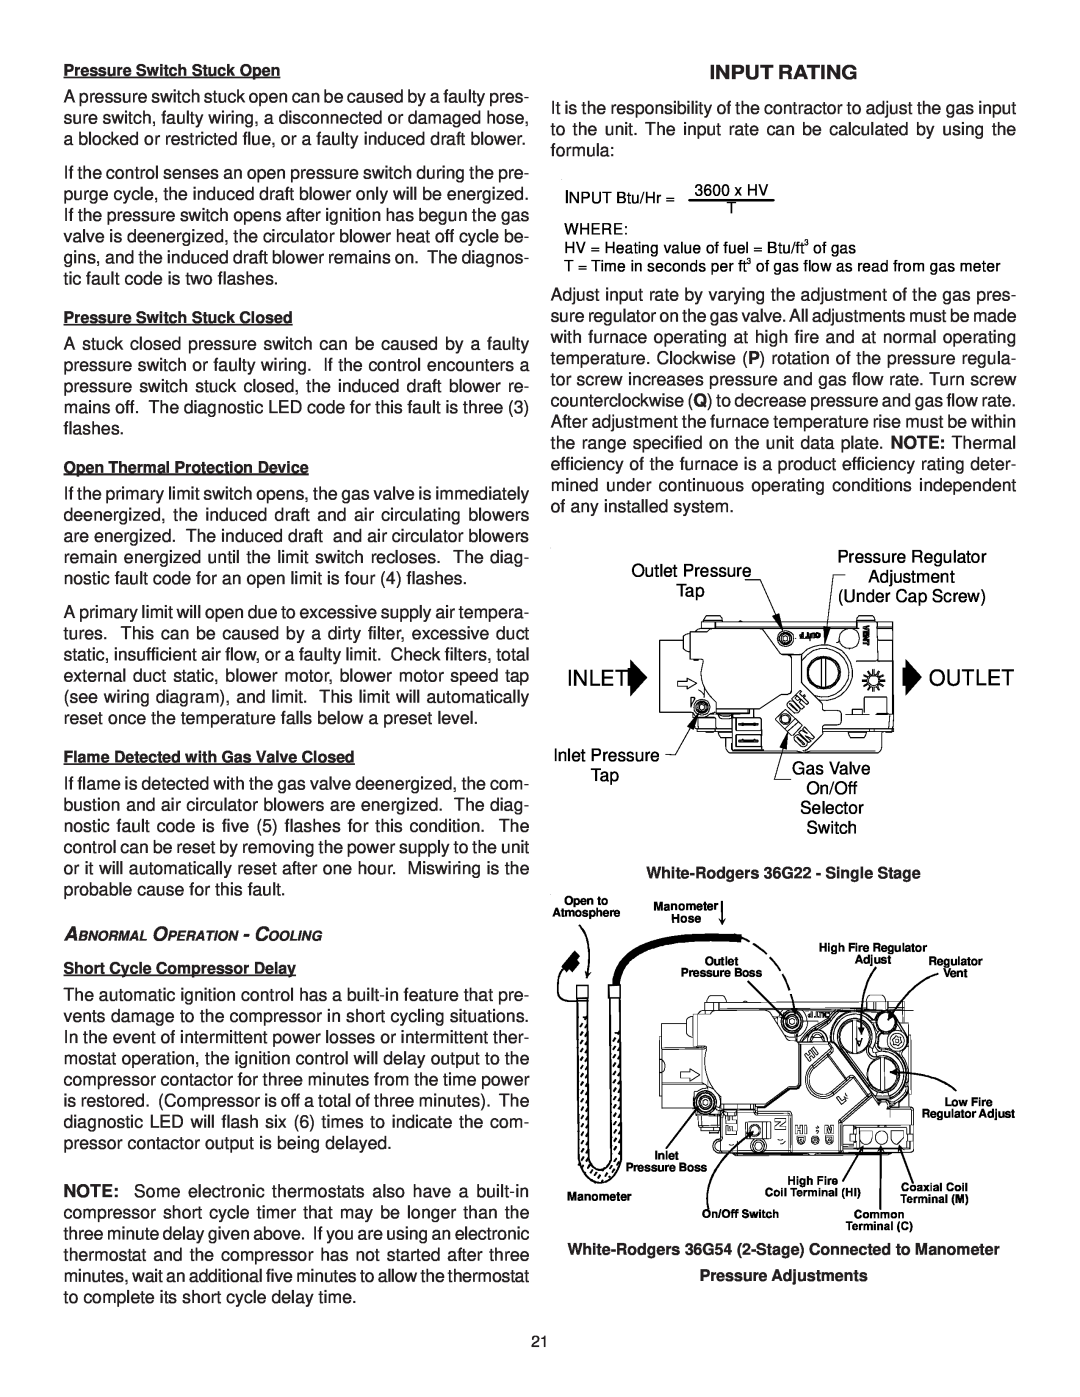 Goodman Mfg CPG SERIES installation manual Inlet, Outlet, Input Rating 